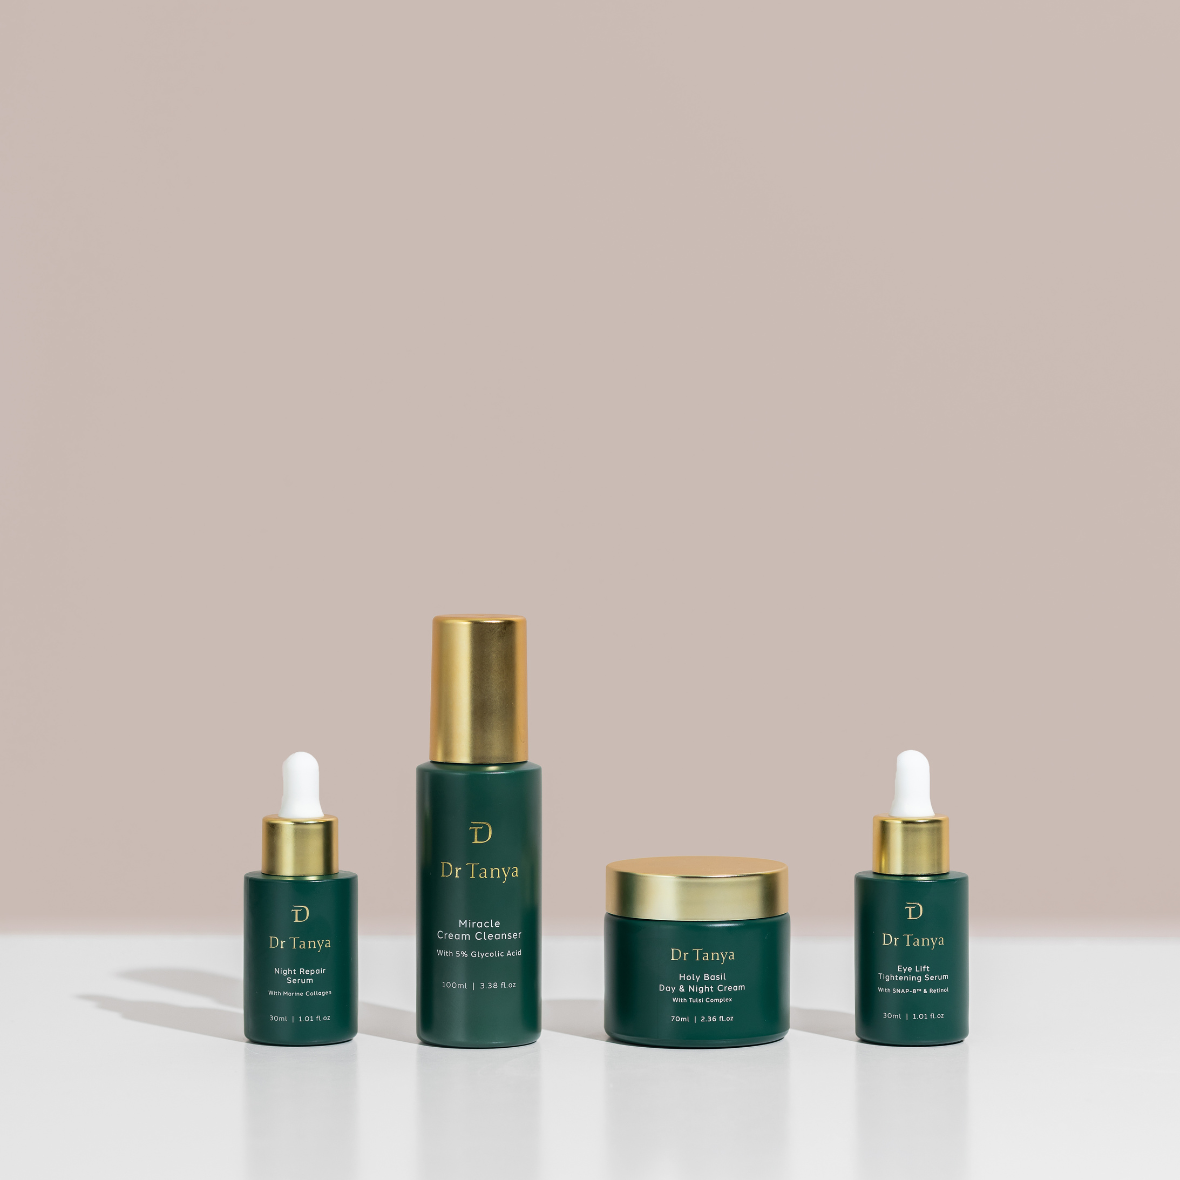 Four dark green skincare product bottles with gold lids lined up in a row against a soft pink backdrop